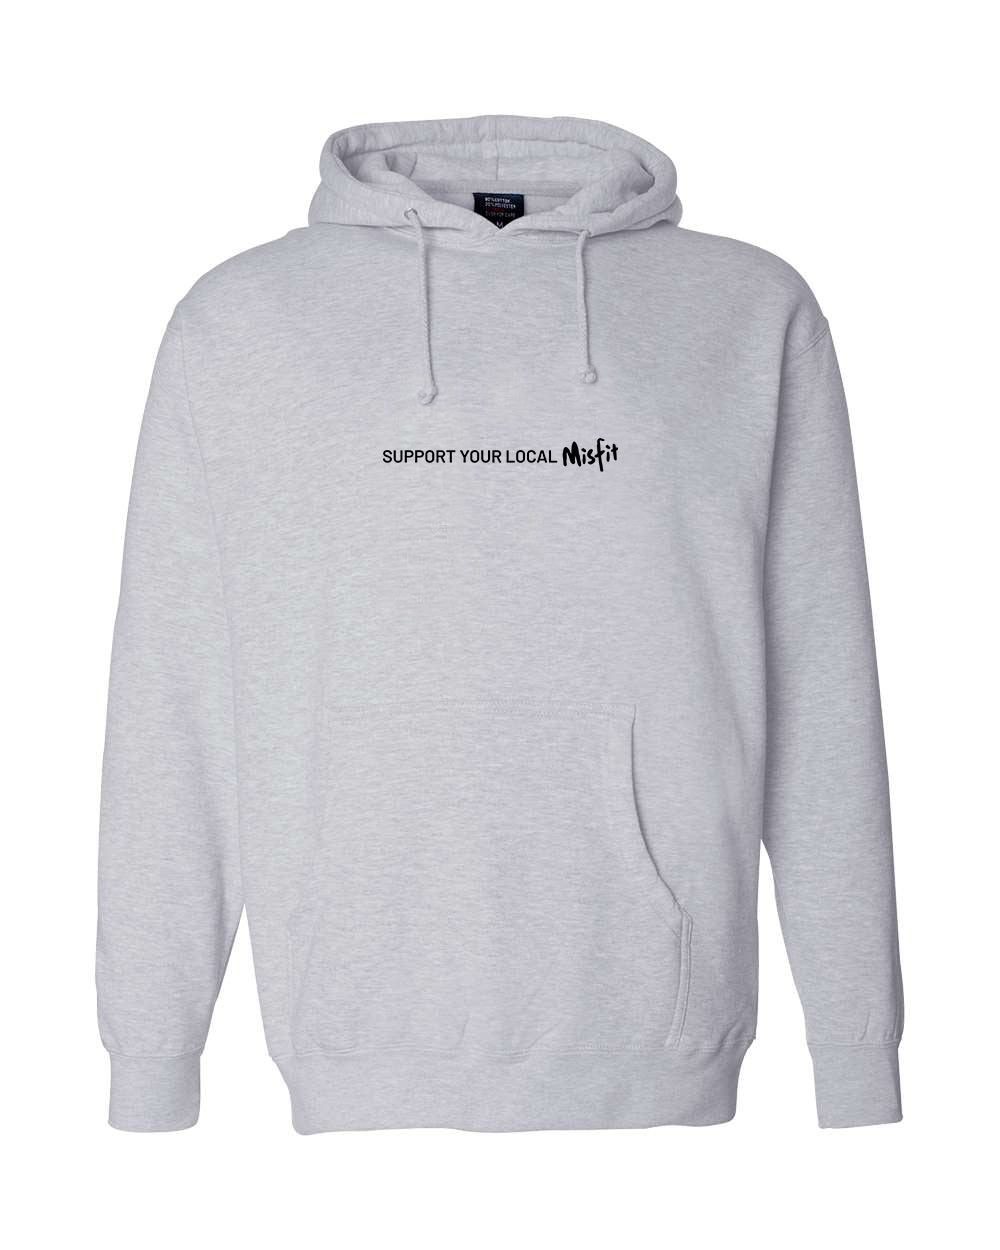 Support Your Local Misfit Unisex Hoodie by Seen Not Seen